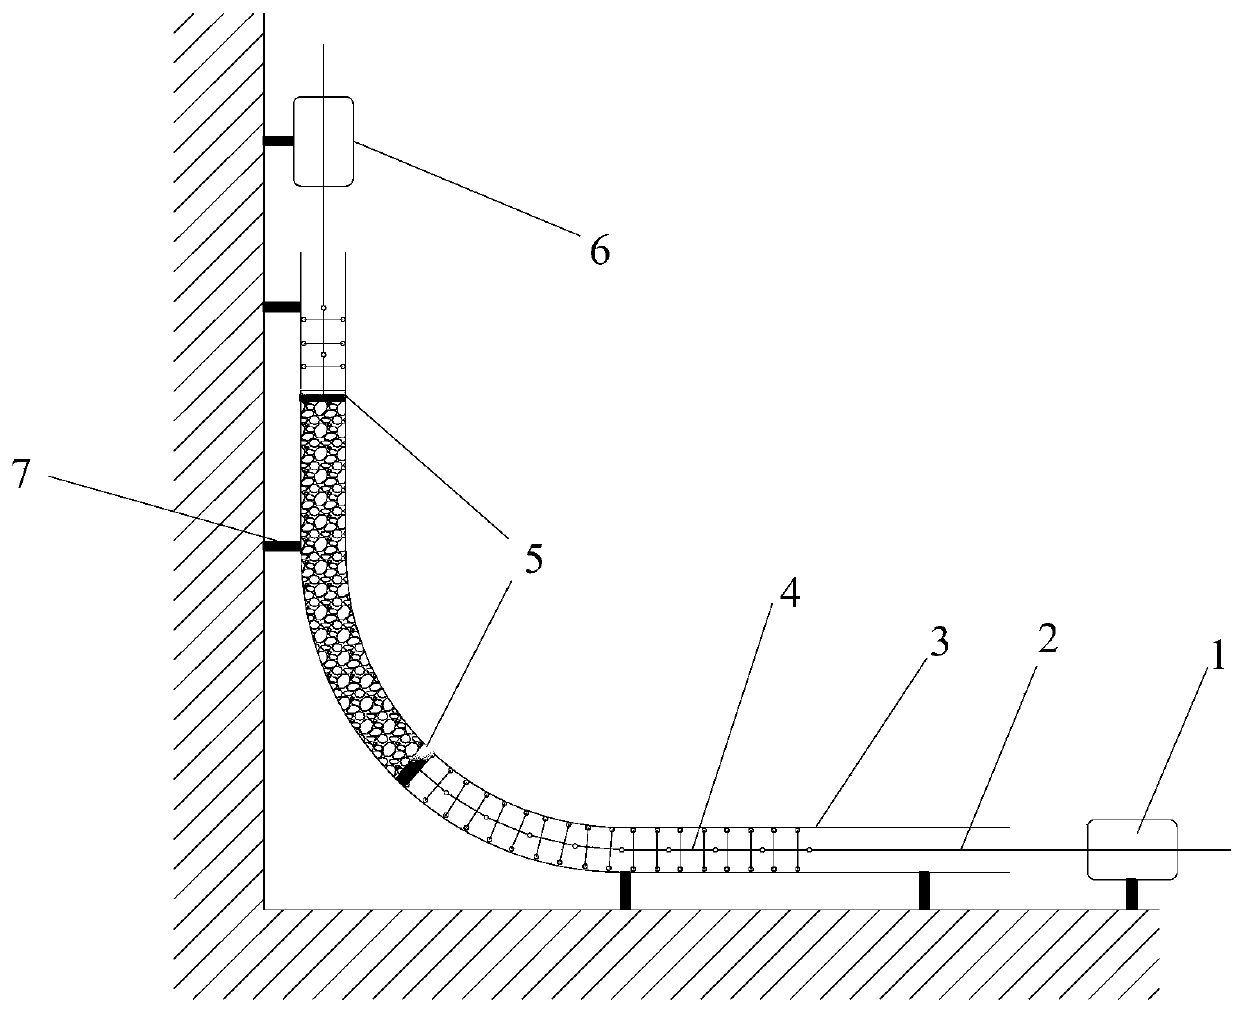 Concrete pumping whole-course simulation test device and detection method